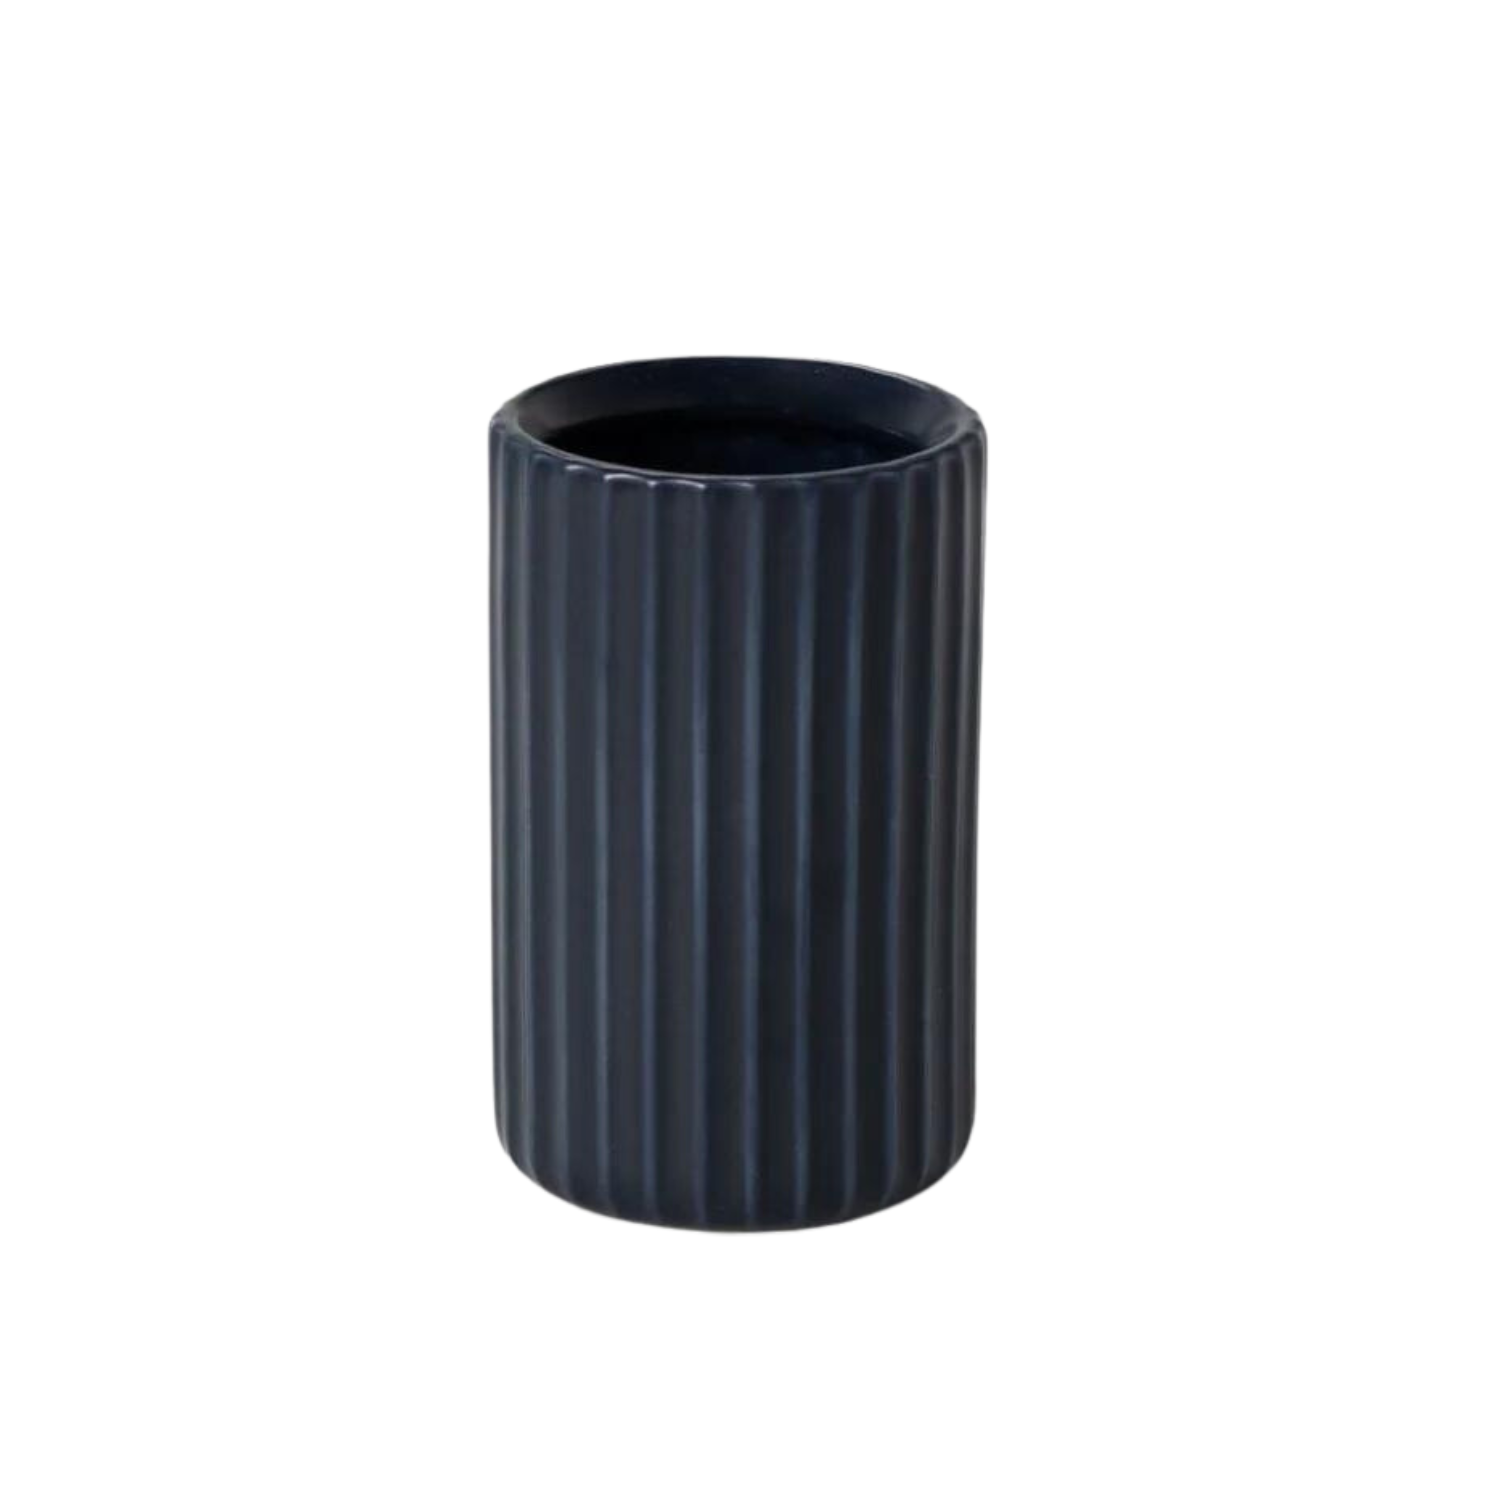 FABLE THE SHORT BUD VASE - MIDNIGHT BLUE